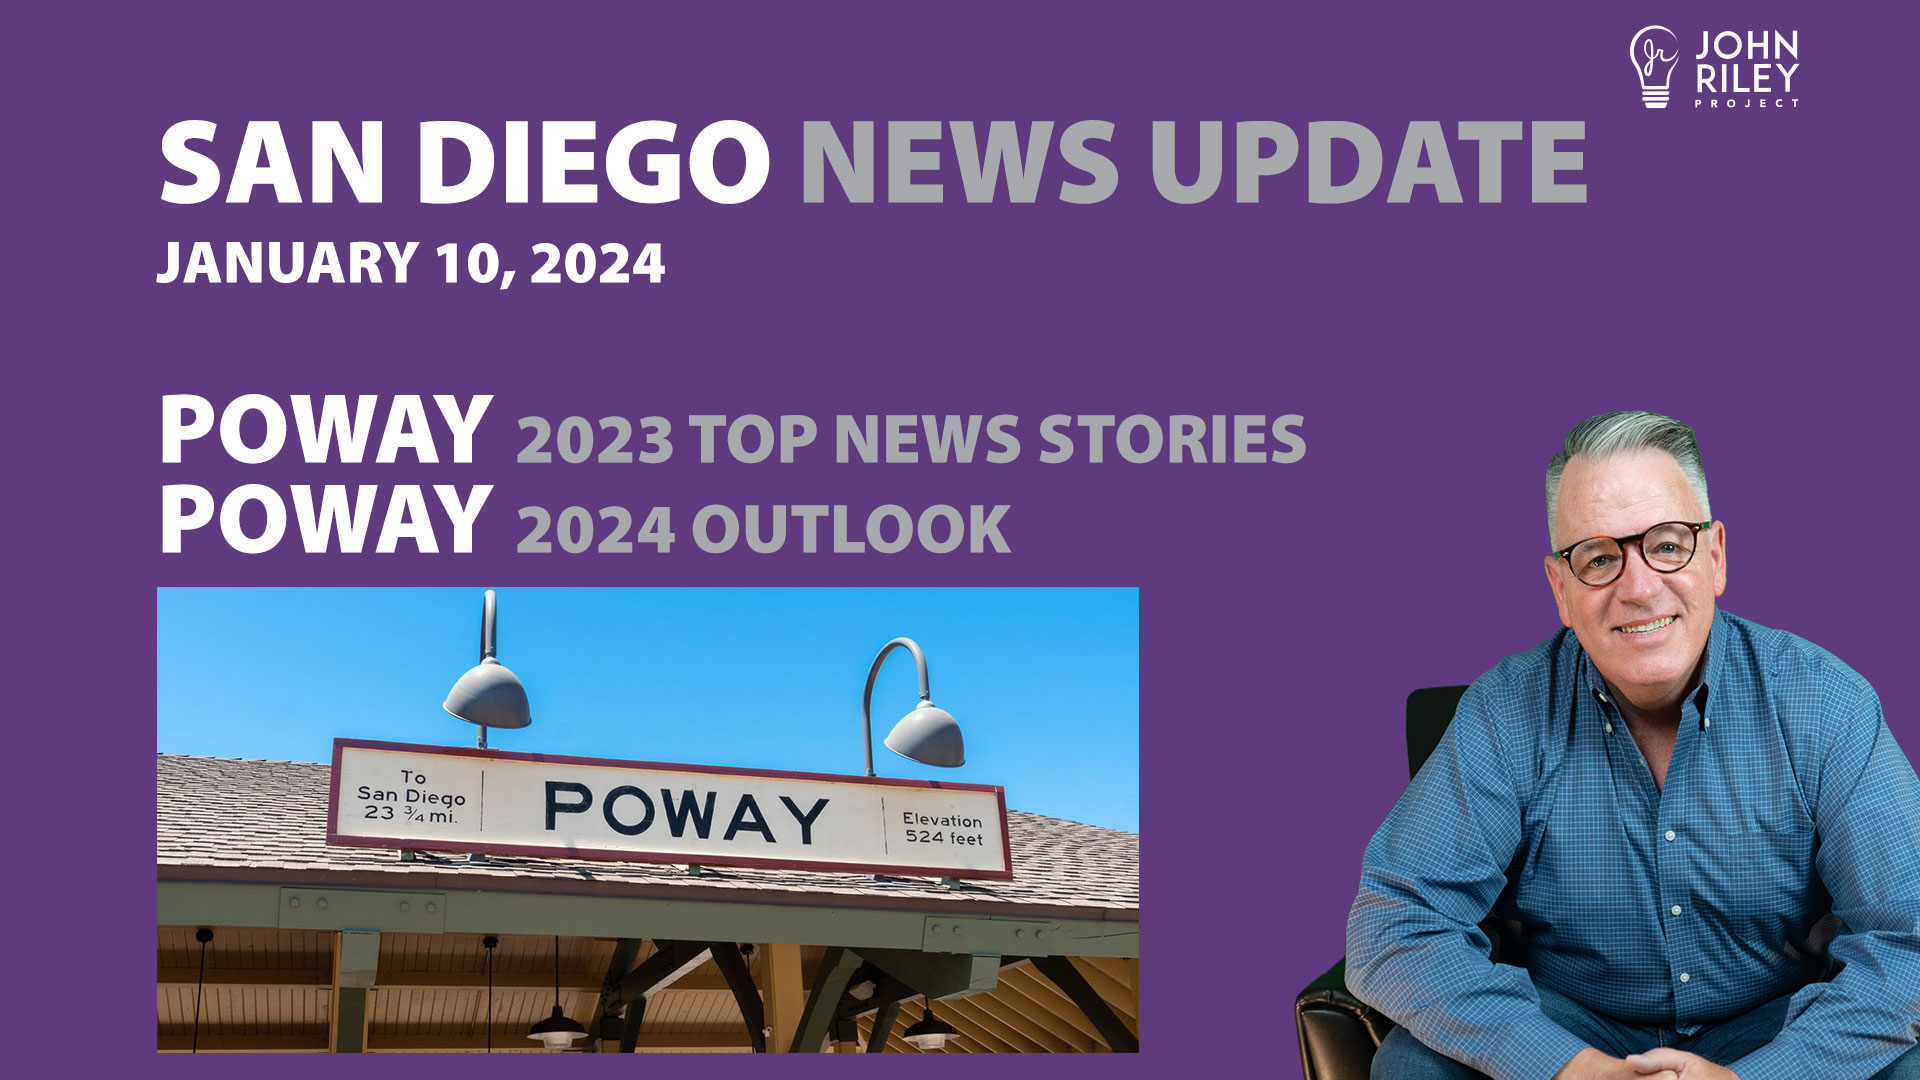 John Riley discusses Poway 2023 Year in Review, 2024 Outlook